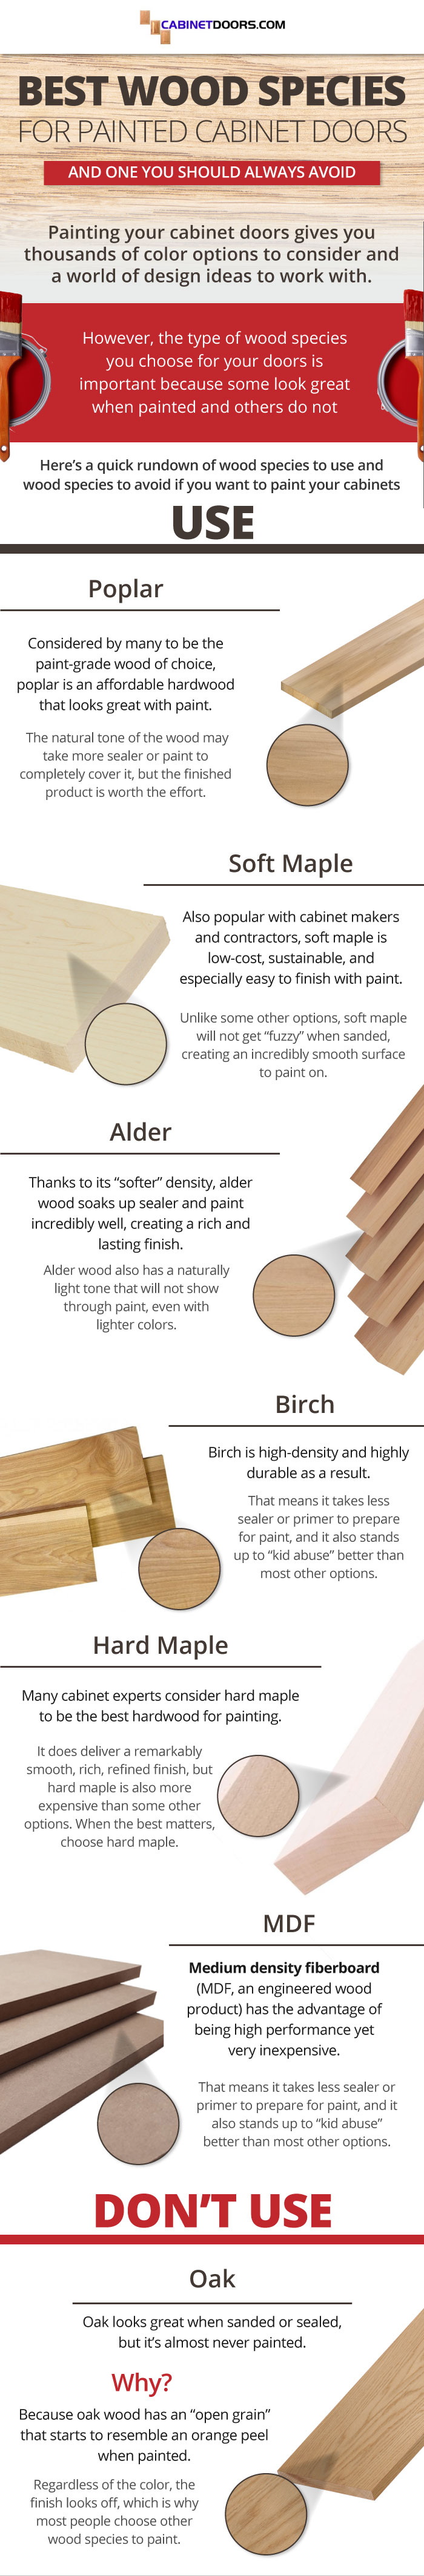 Best Dye for Staining Birch Panel Doors? - Woodworking, Blog, Videos, Plans